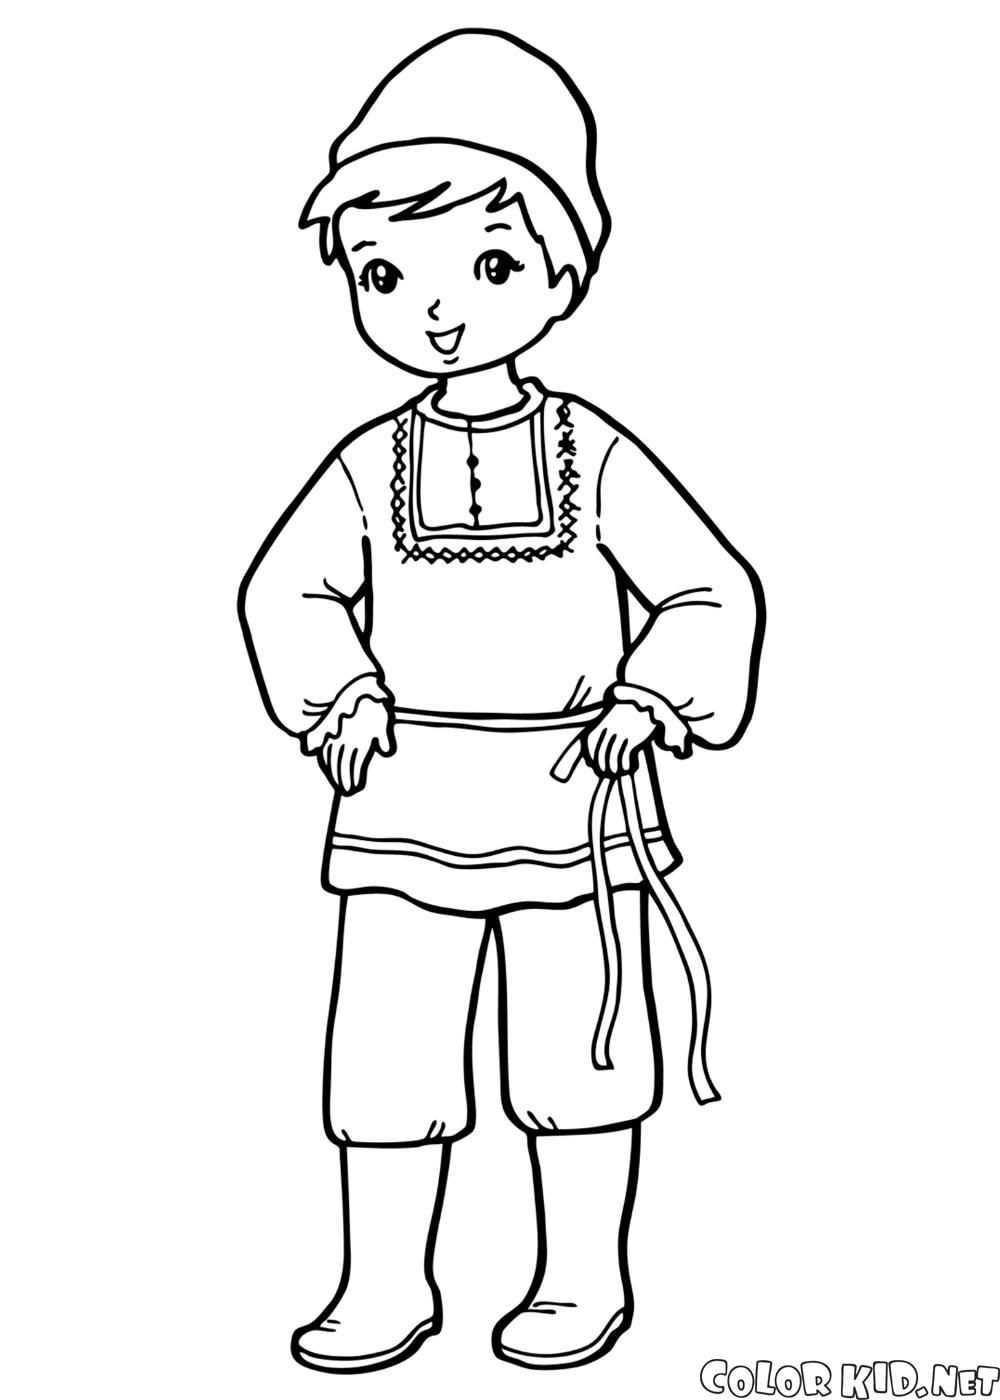 Coloring page - The boy in national costume